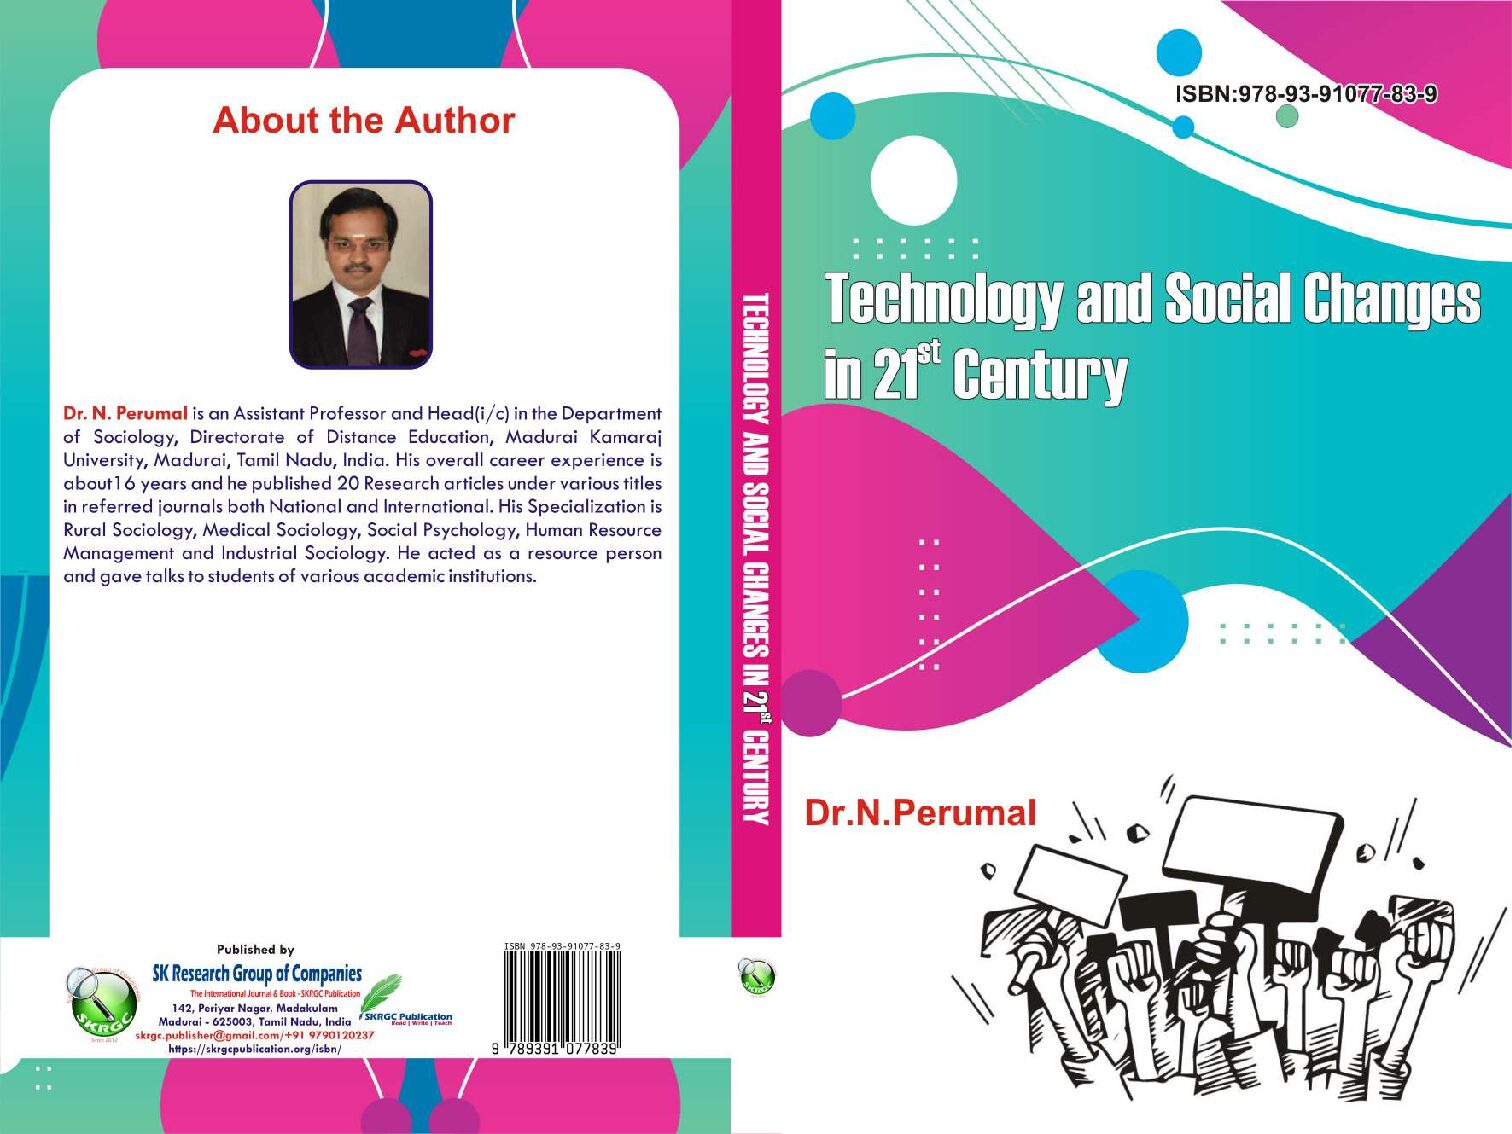 Technology and Social Changes in 21st Century